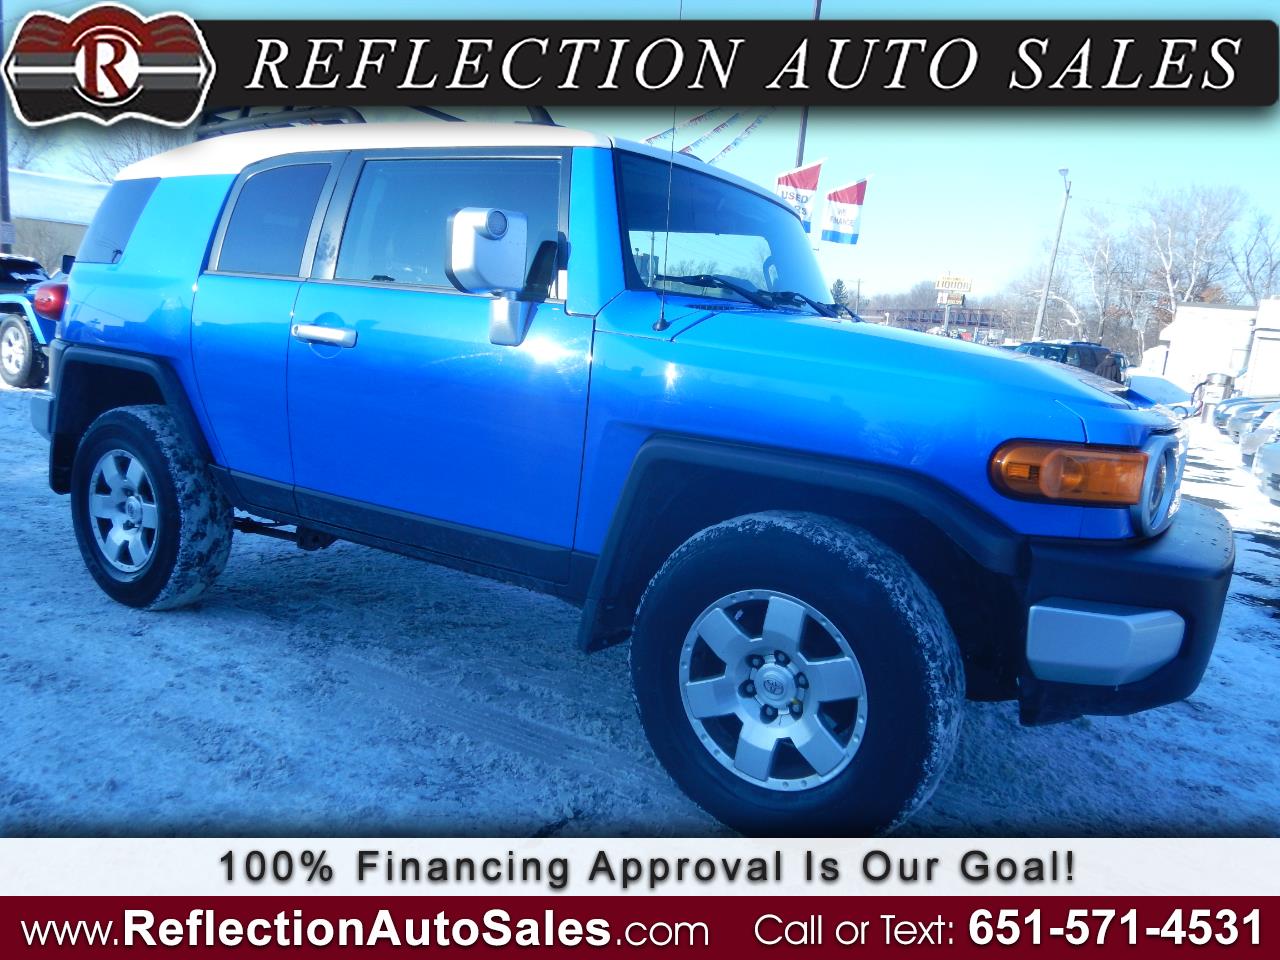 Used Cars For Sale Oakdale Mn 55128 Reflection Auto Sales